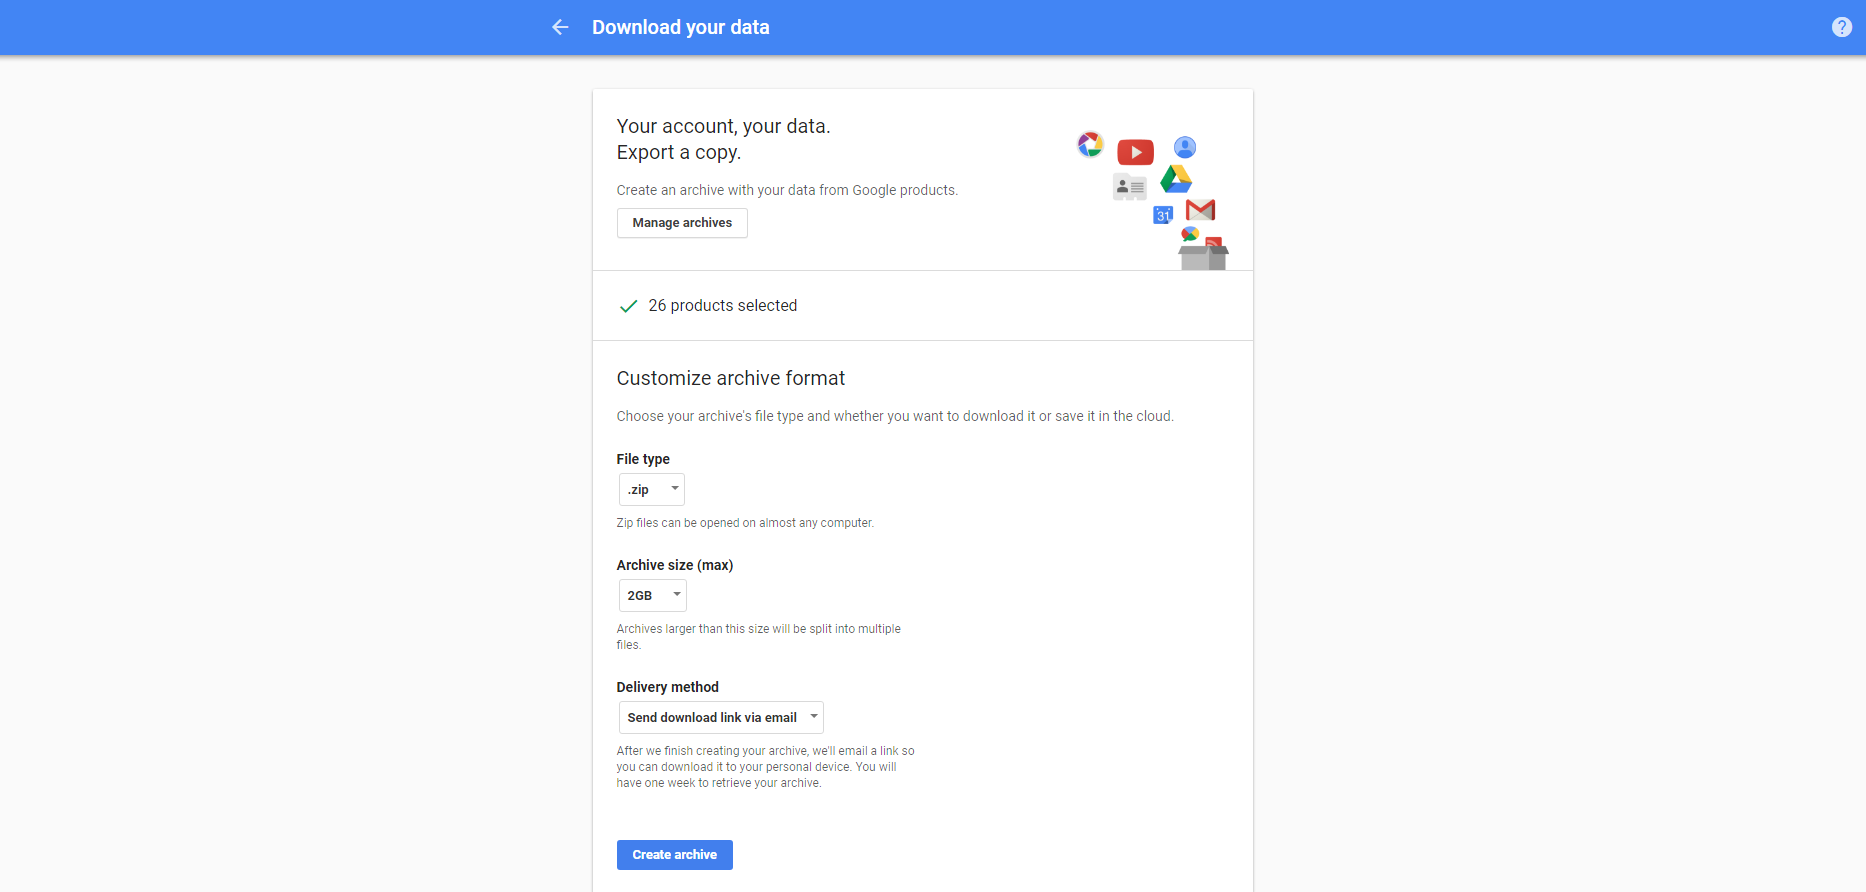 how to download your Google data